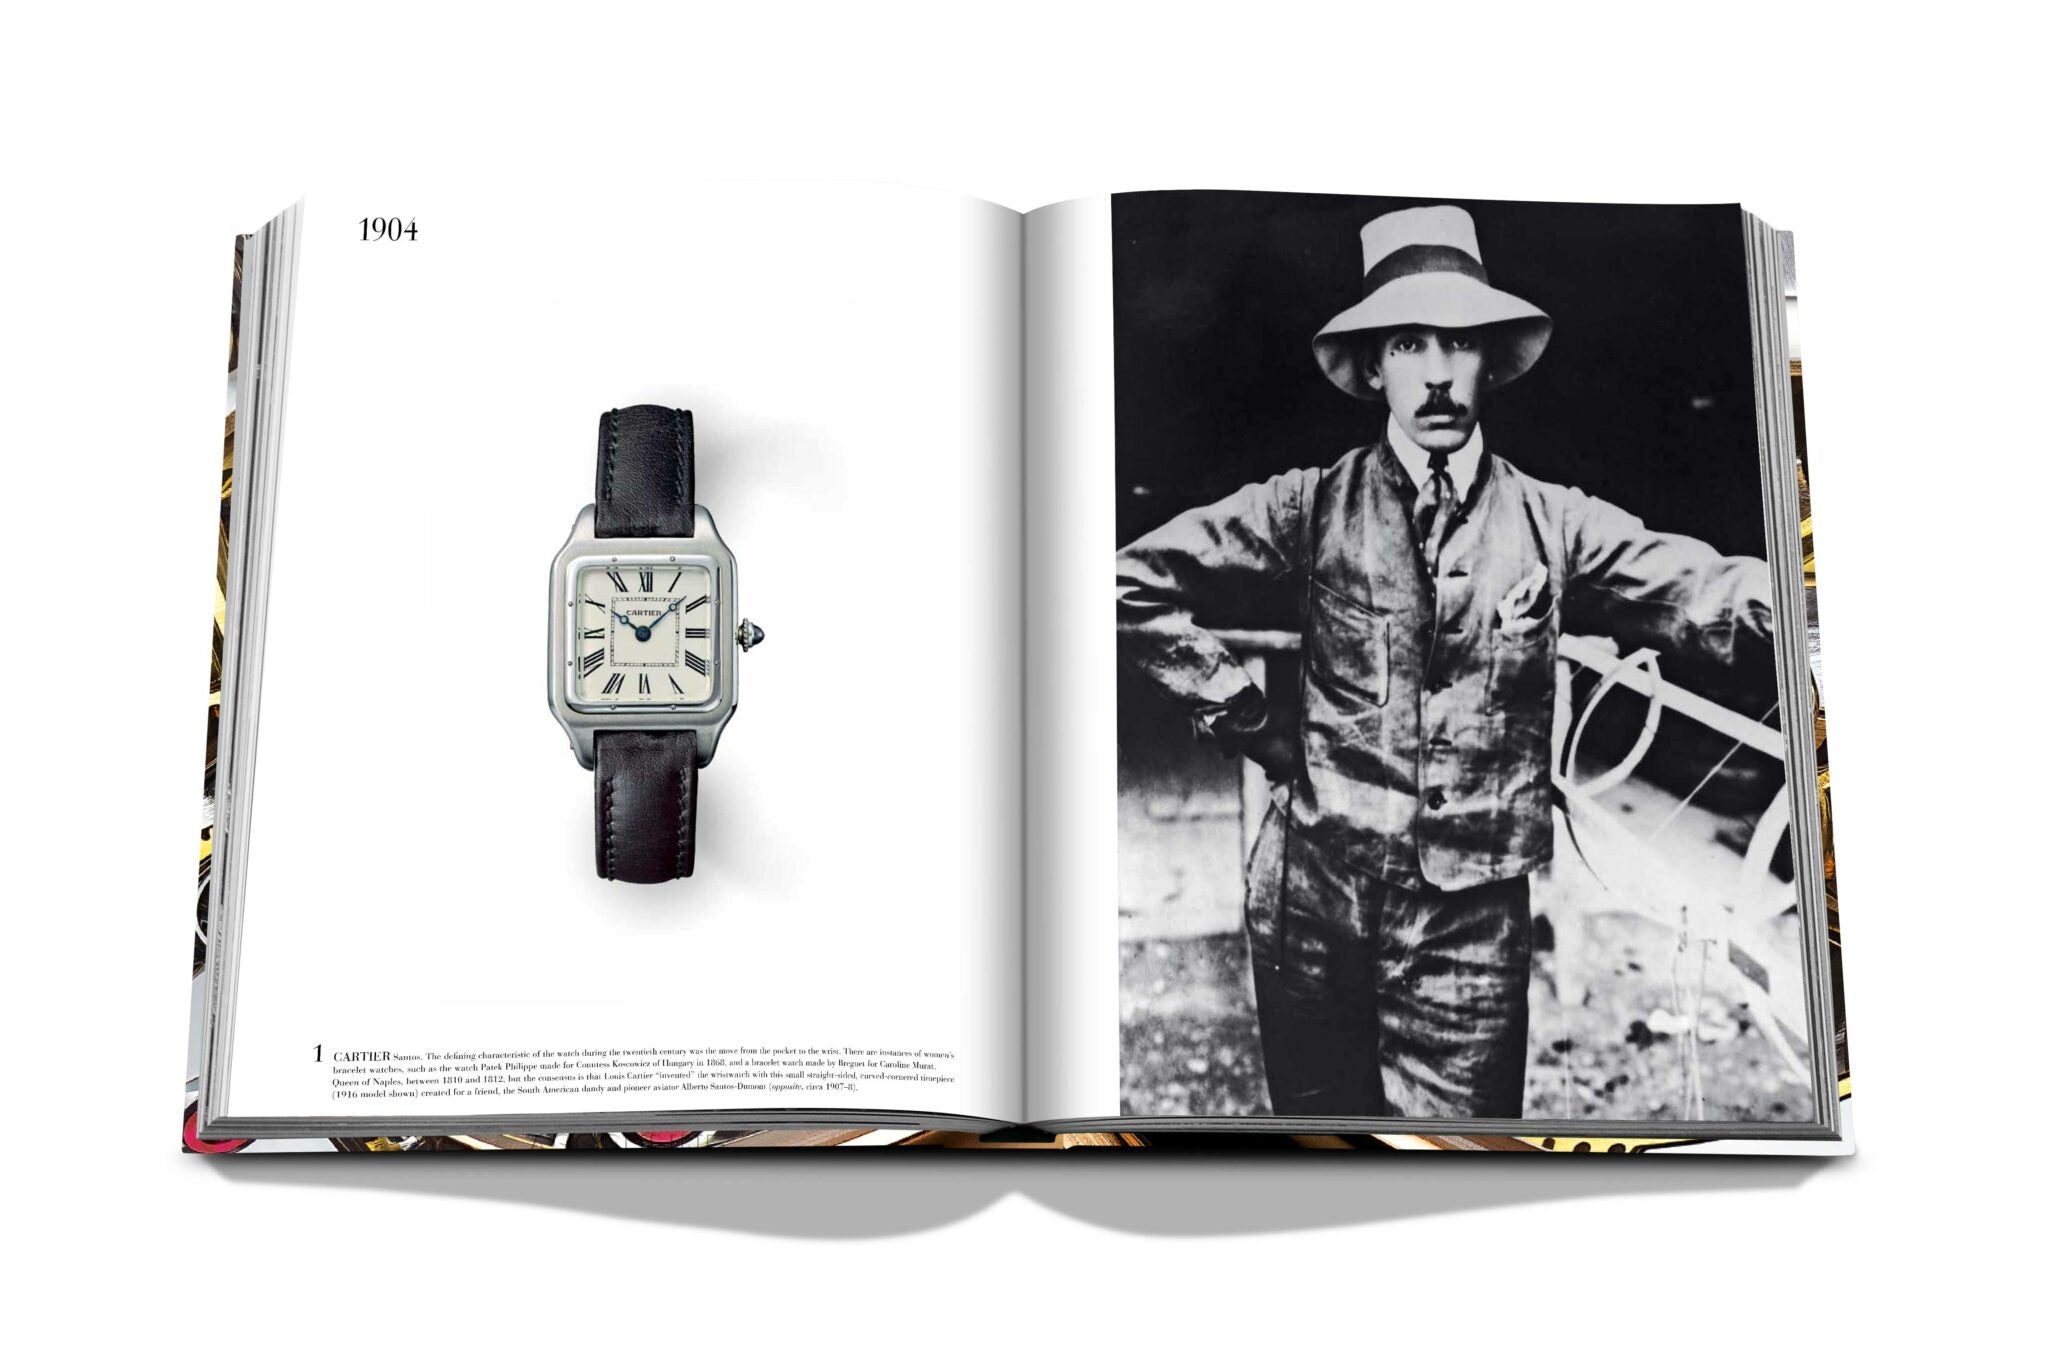 Assouline The Impossible Collection Of Watches. 2nd Edt.